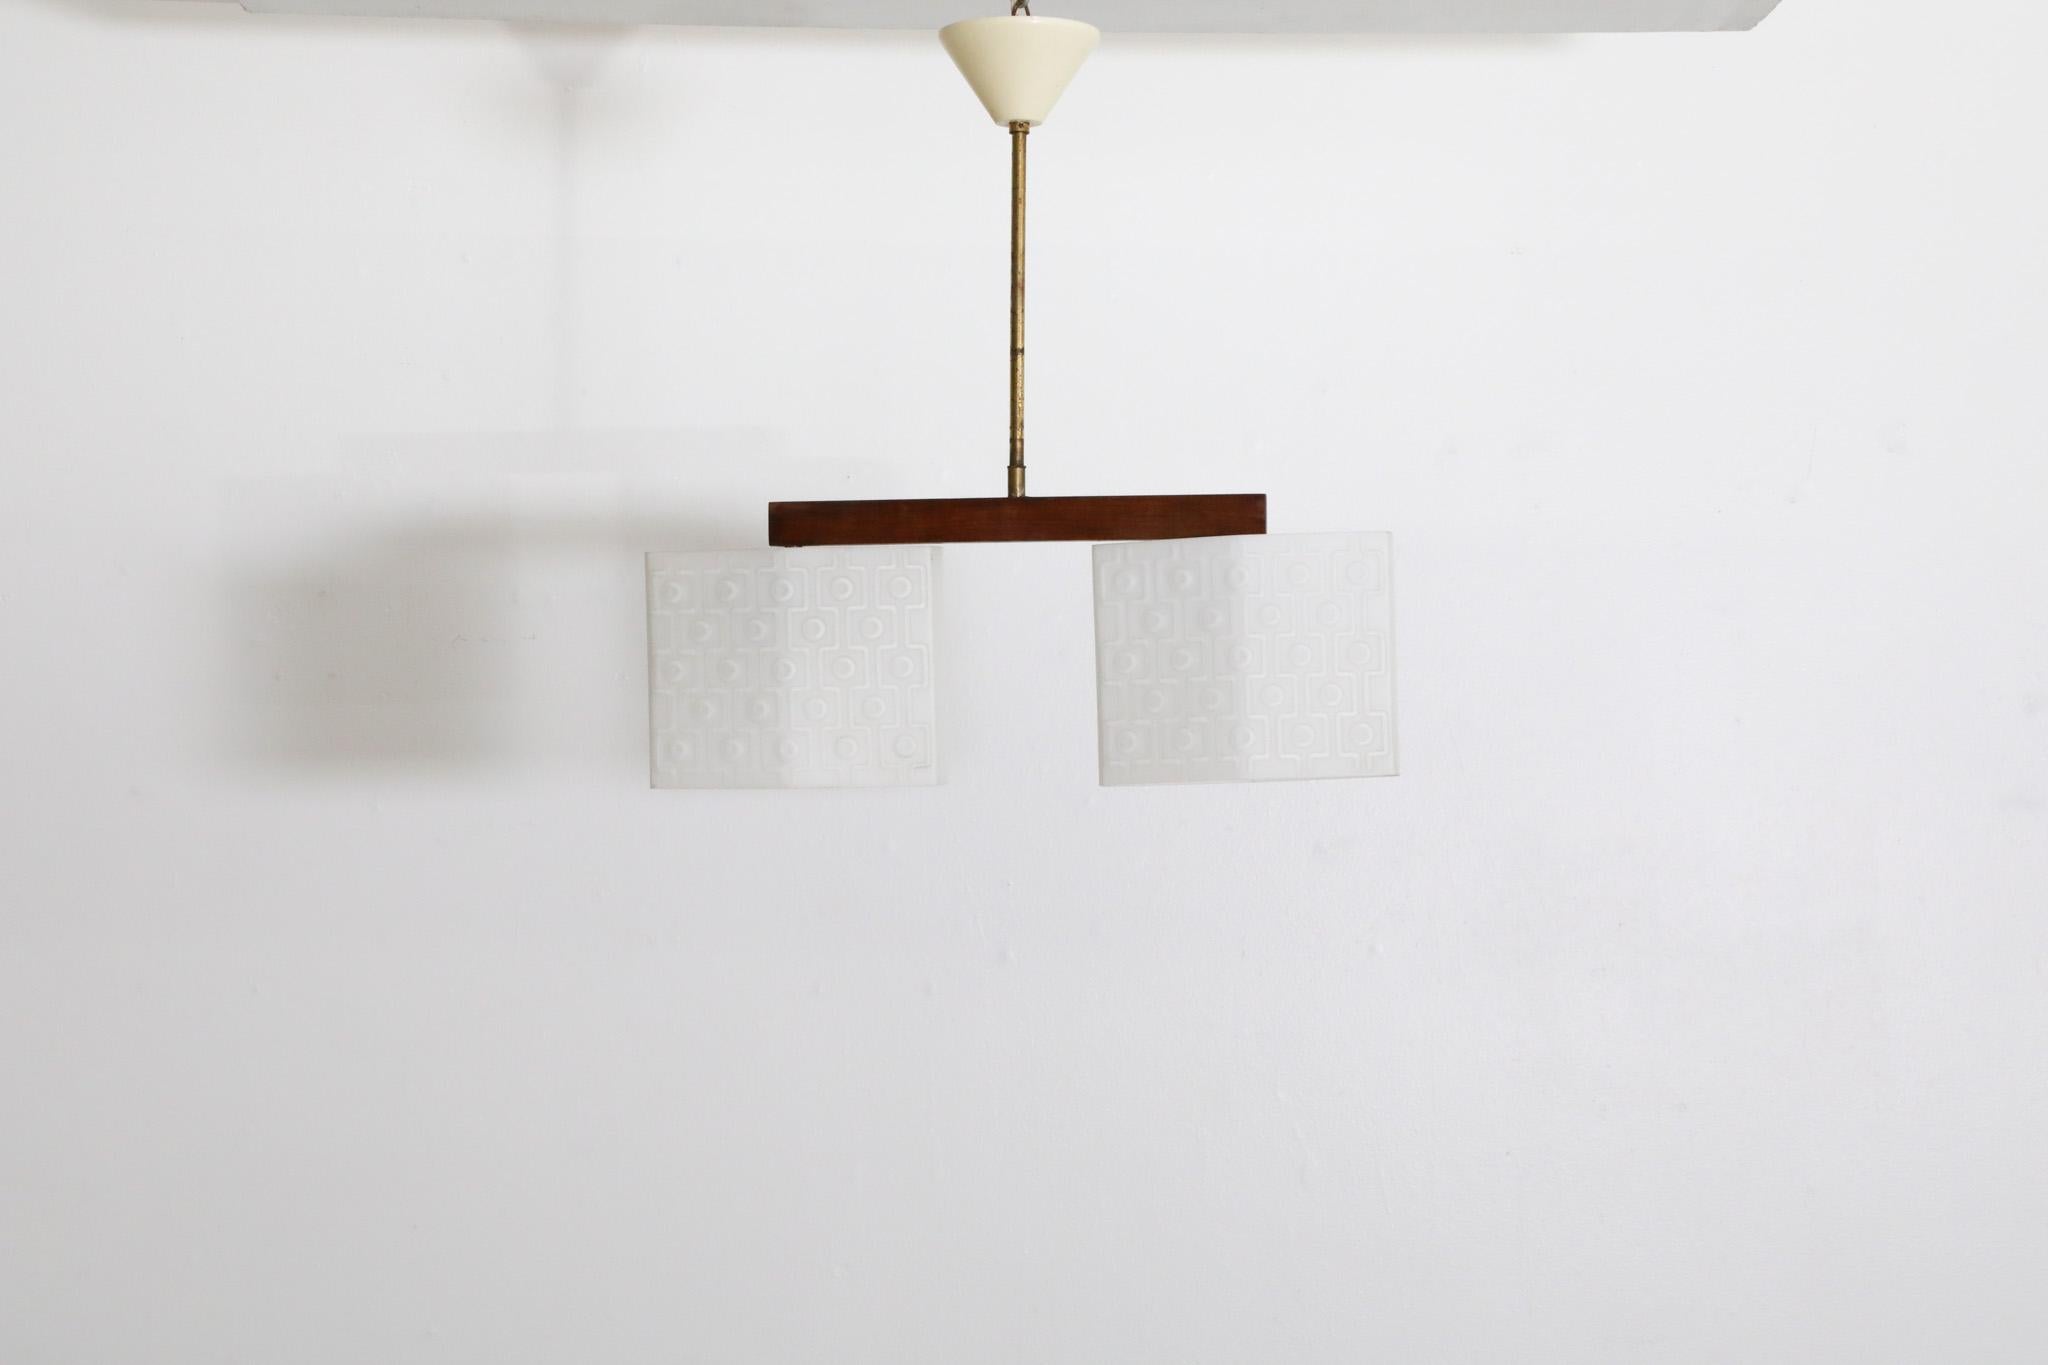 MId-Century double milk glass ceiling pendant with Brass stem on a teak bar and plastic canopy. Two tessellated milk glass shades textured with an embossed design that compliments the overall style and character of the light. In original condition